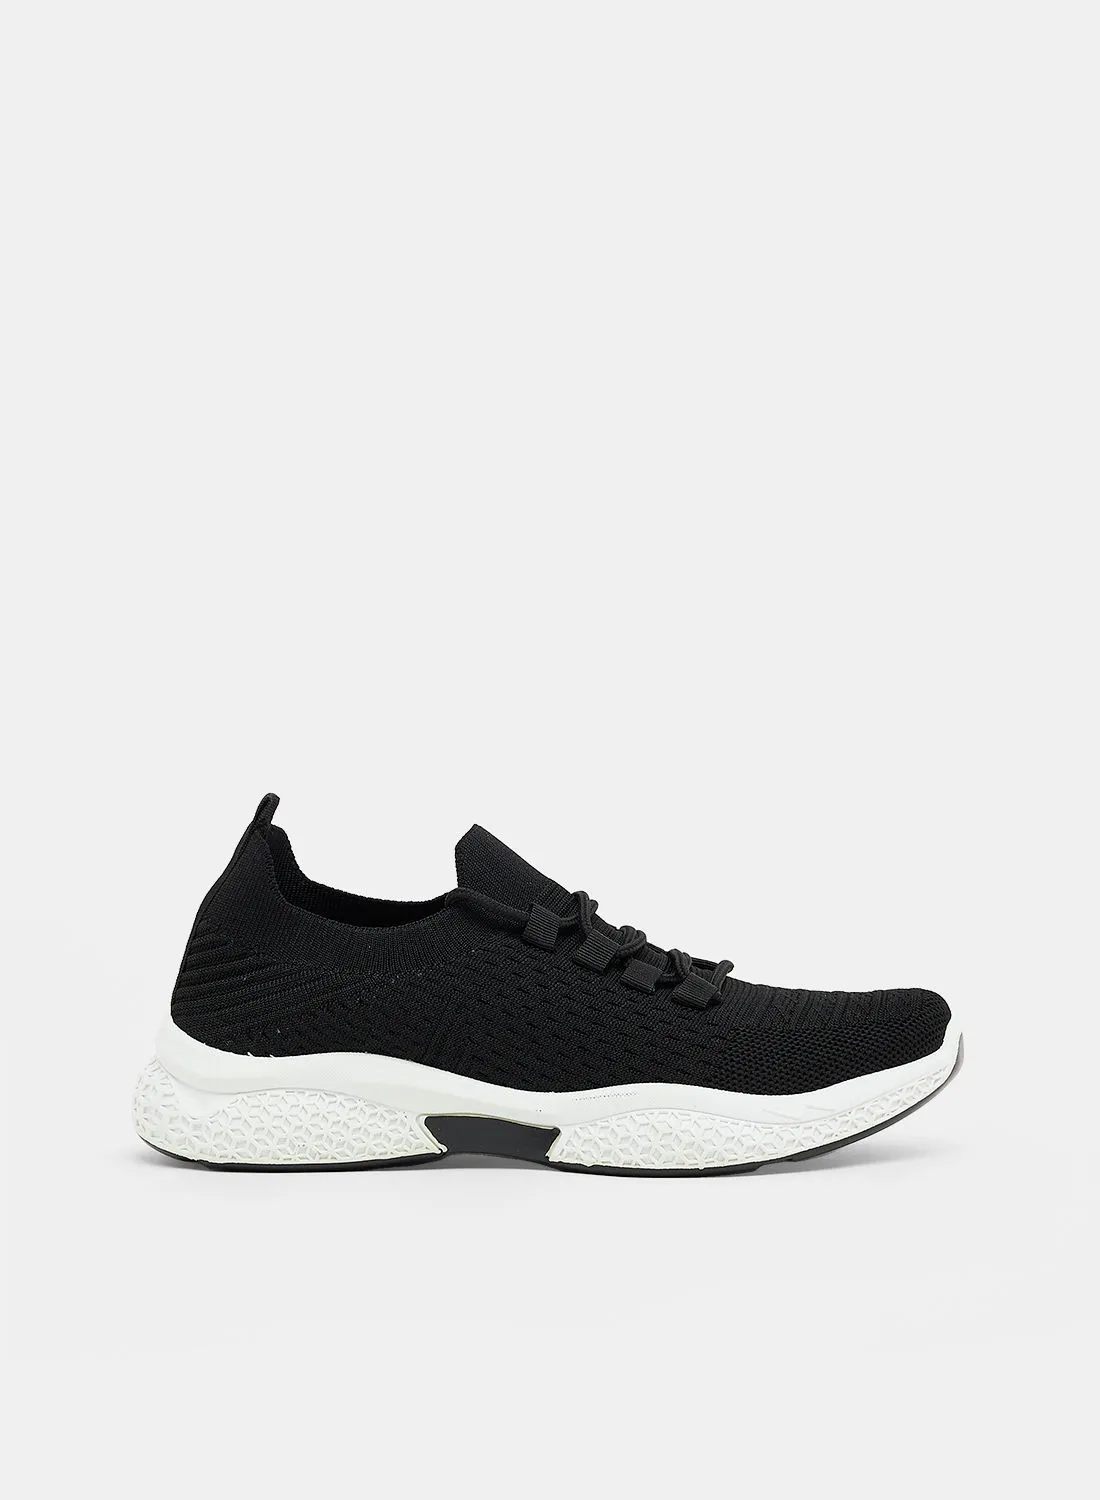 Spot-On Basic Lace-Up Sneakers